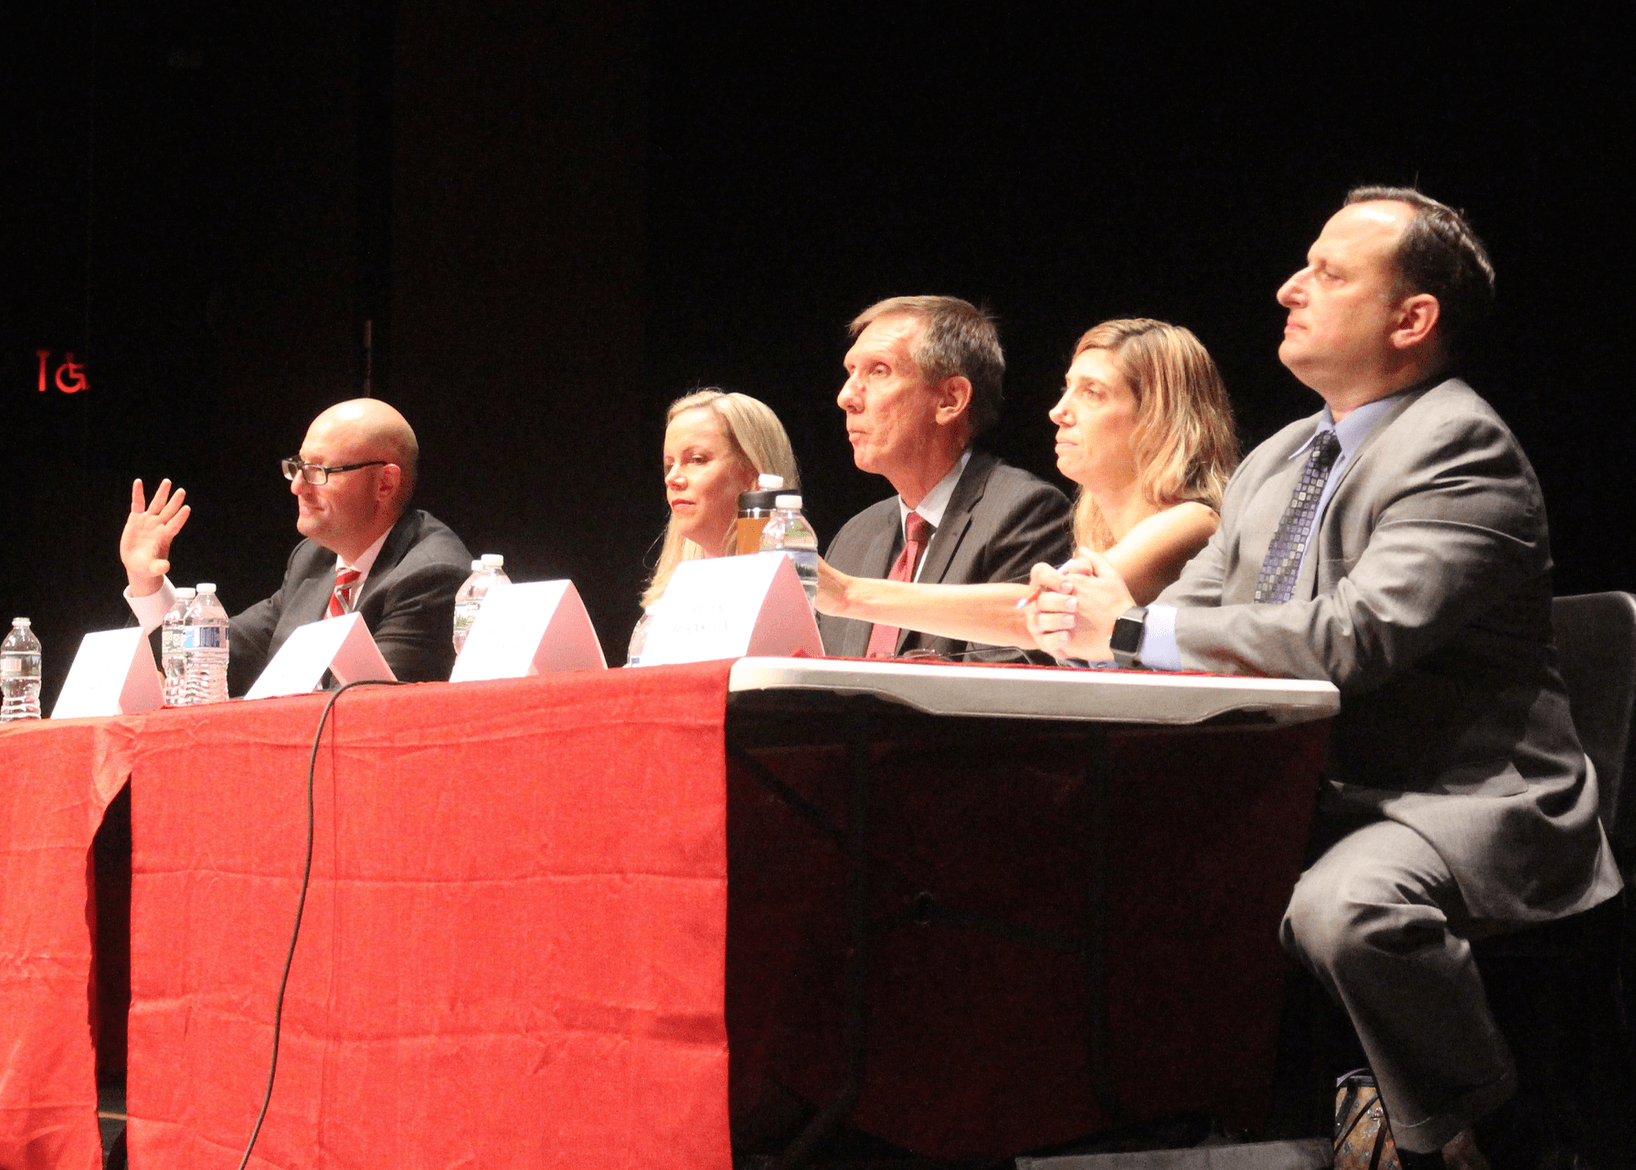 Jason Auerbach, Meghan Olsson, Peter Sherr, Kathleen Stowe and Peter Bernstein during the Oct 10, 2017 Board of Education candidate forum at GHS. Photo: Leslie Yager